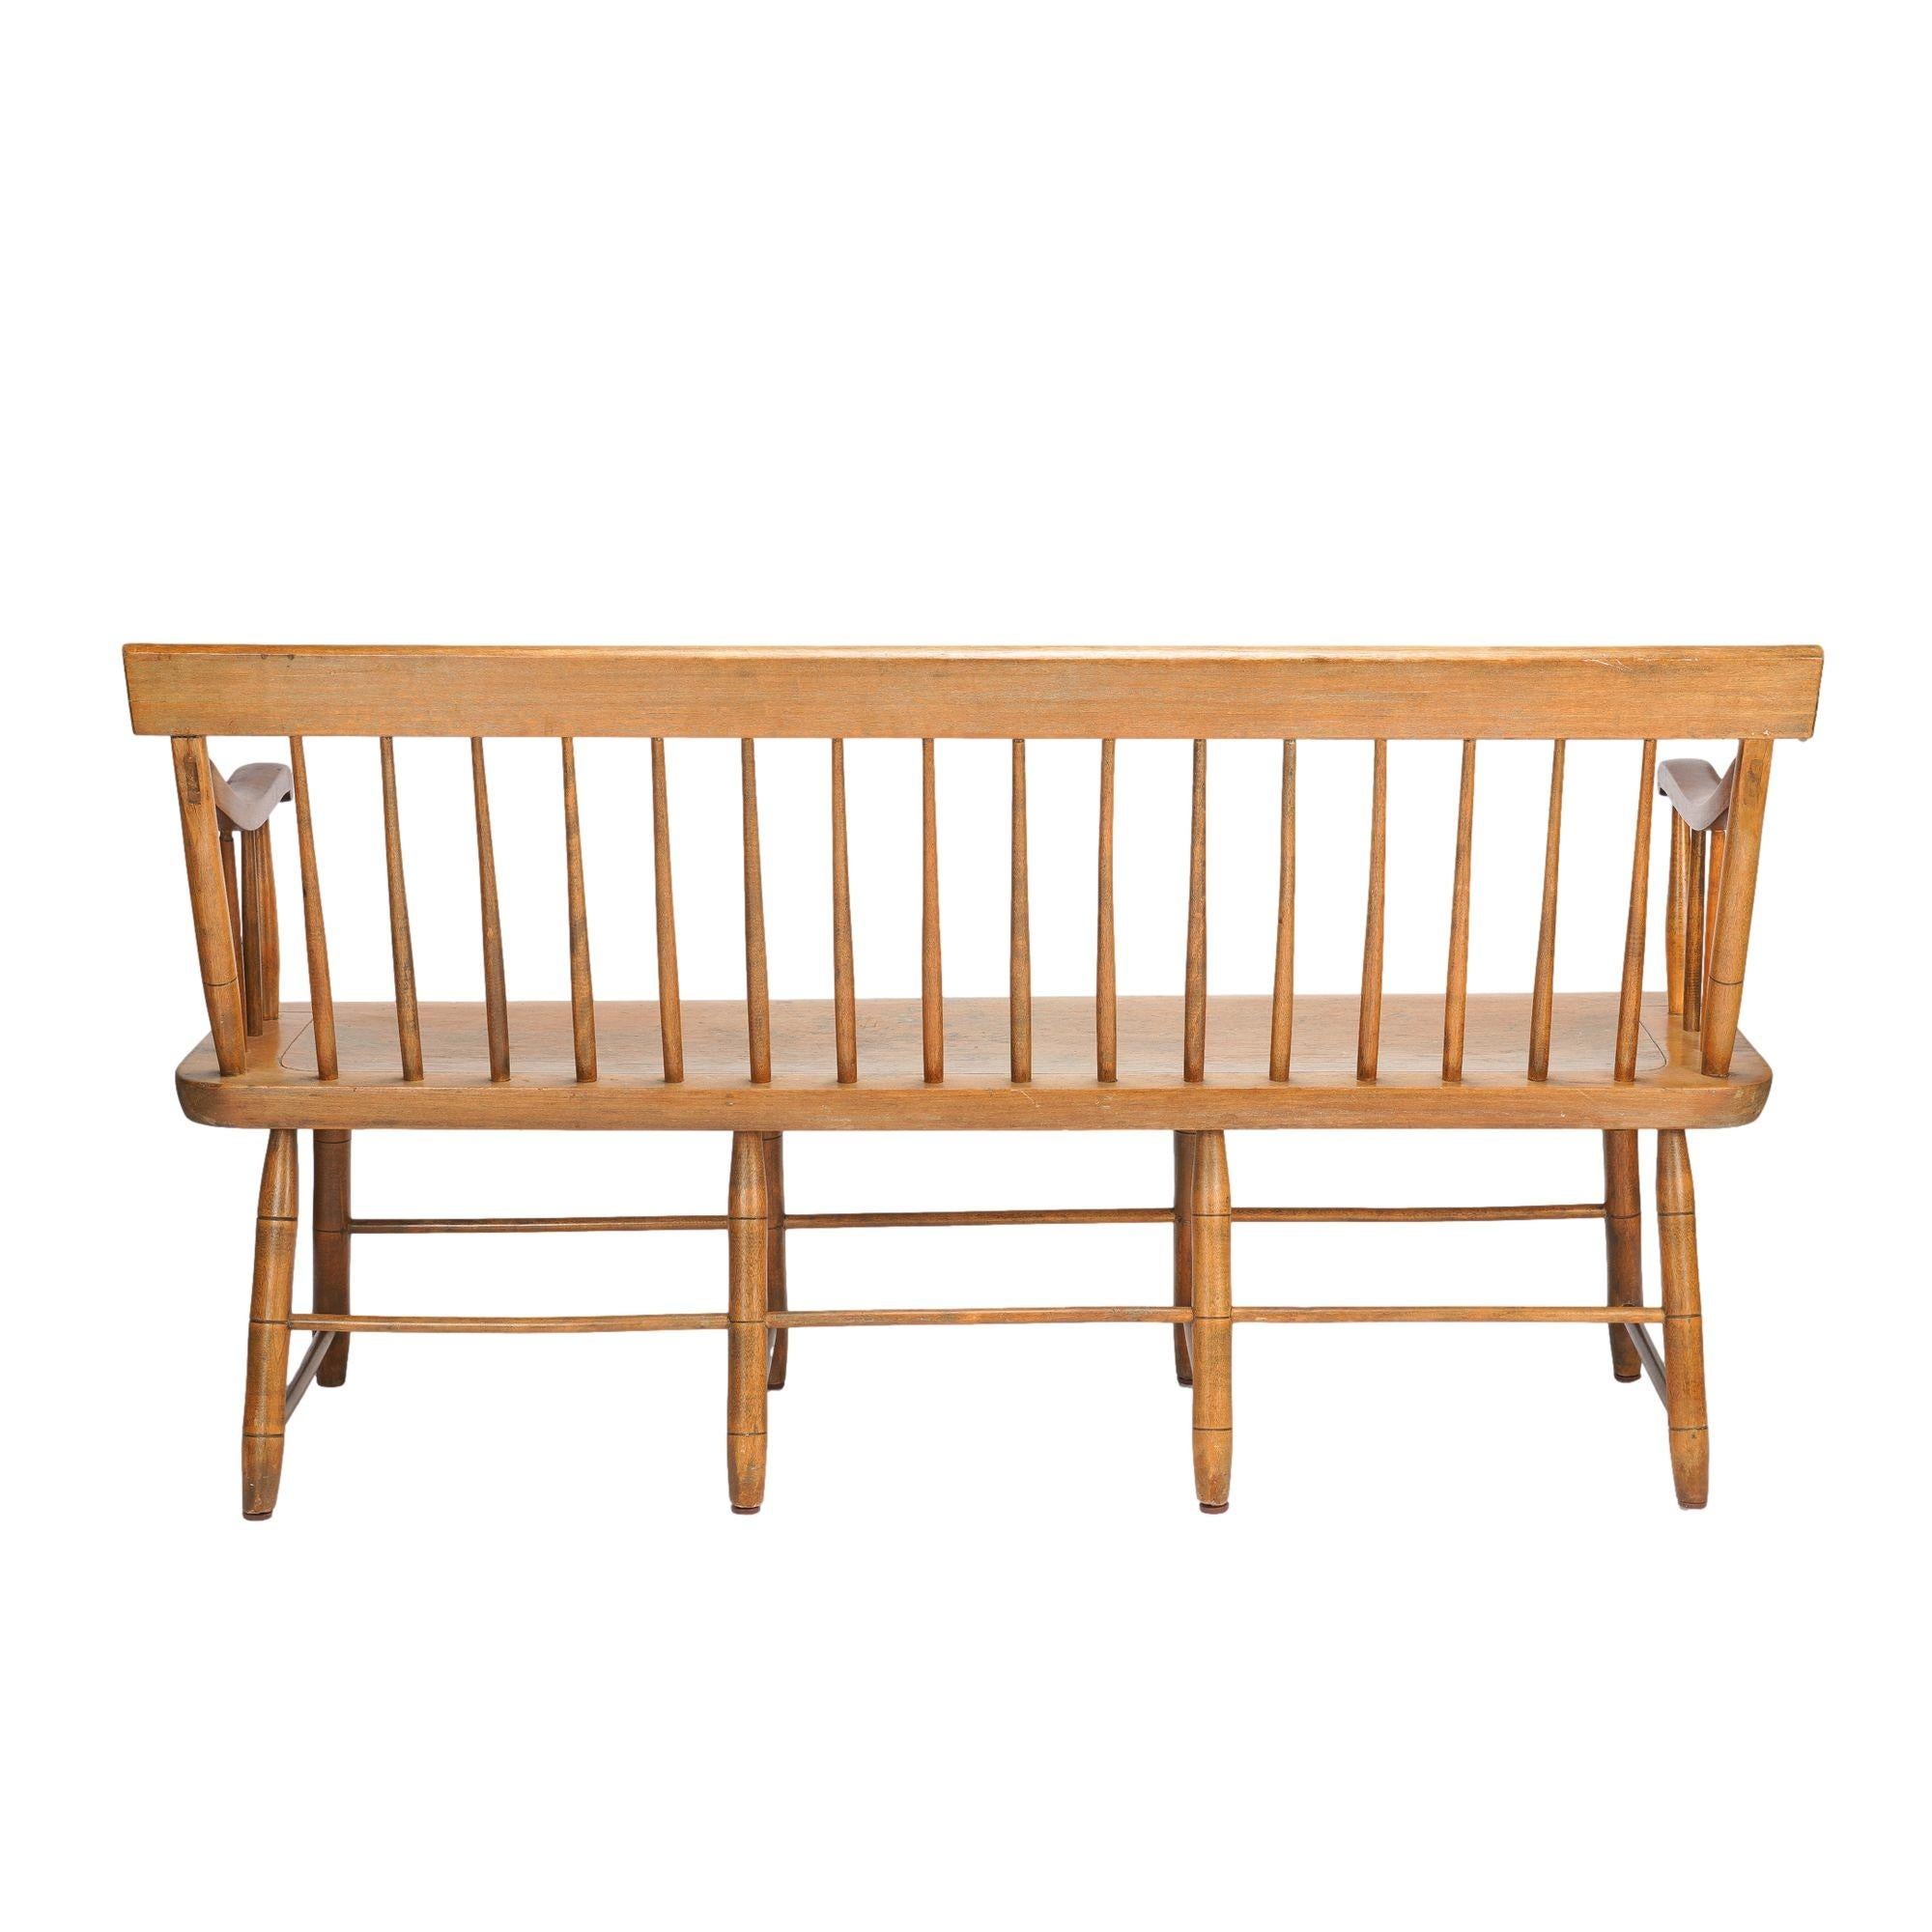 19th Century American Windsor bench, c. 1830 For Sale